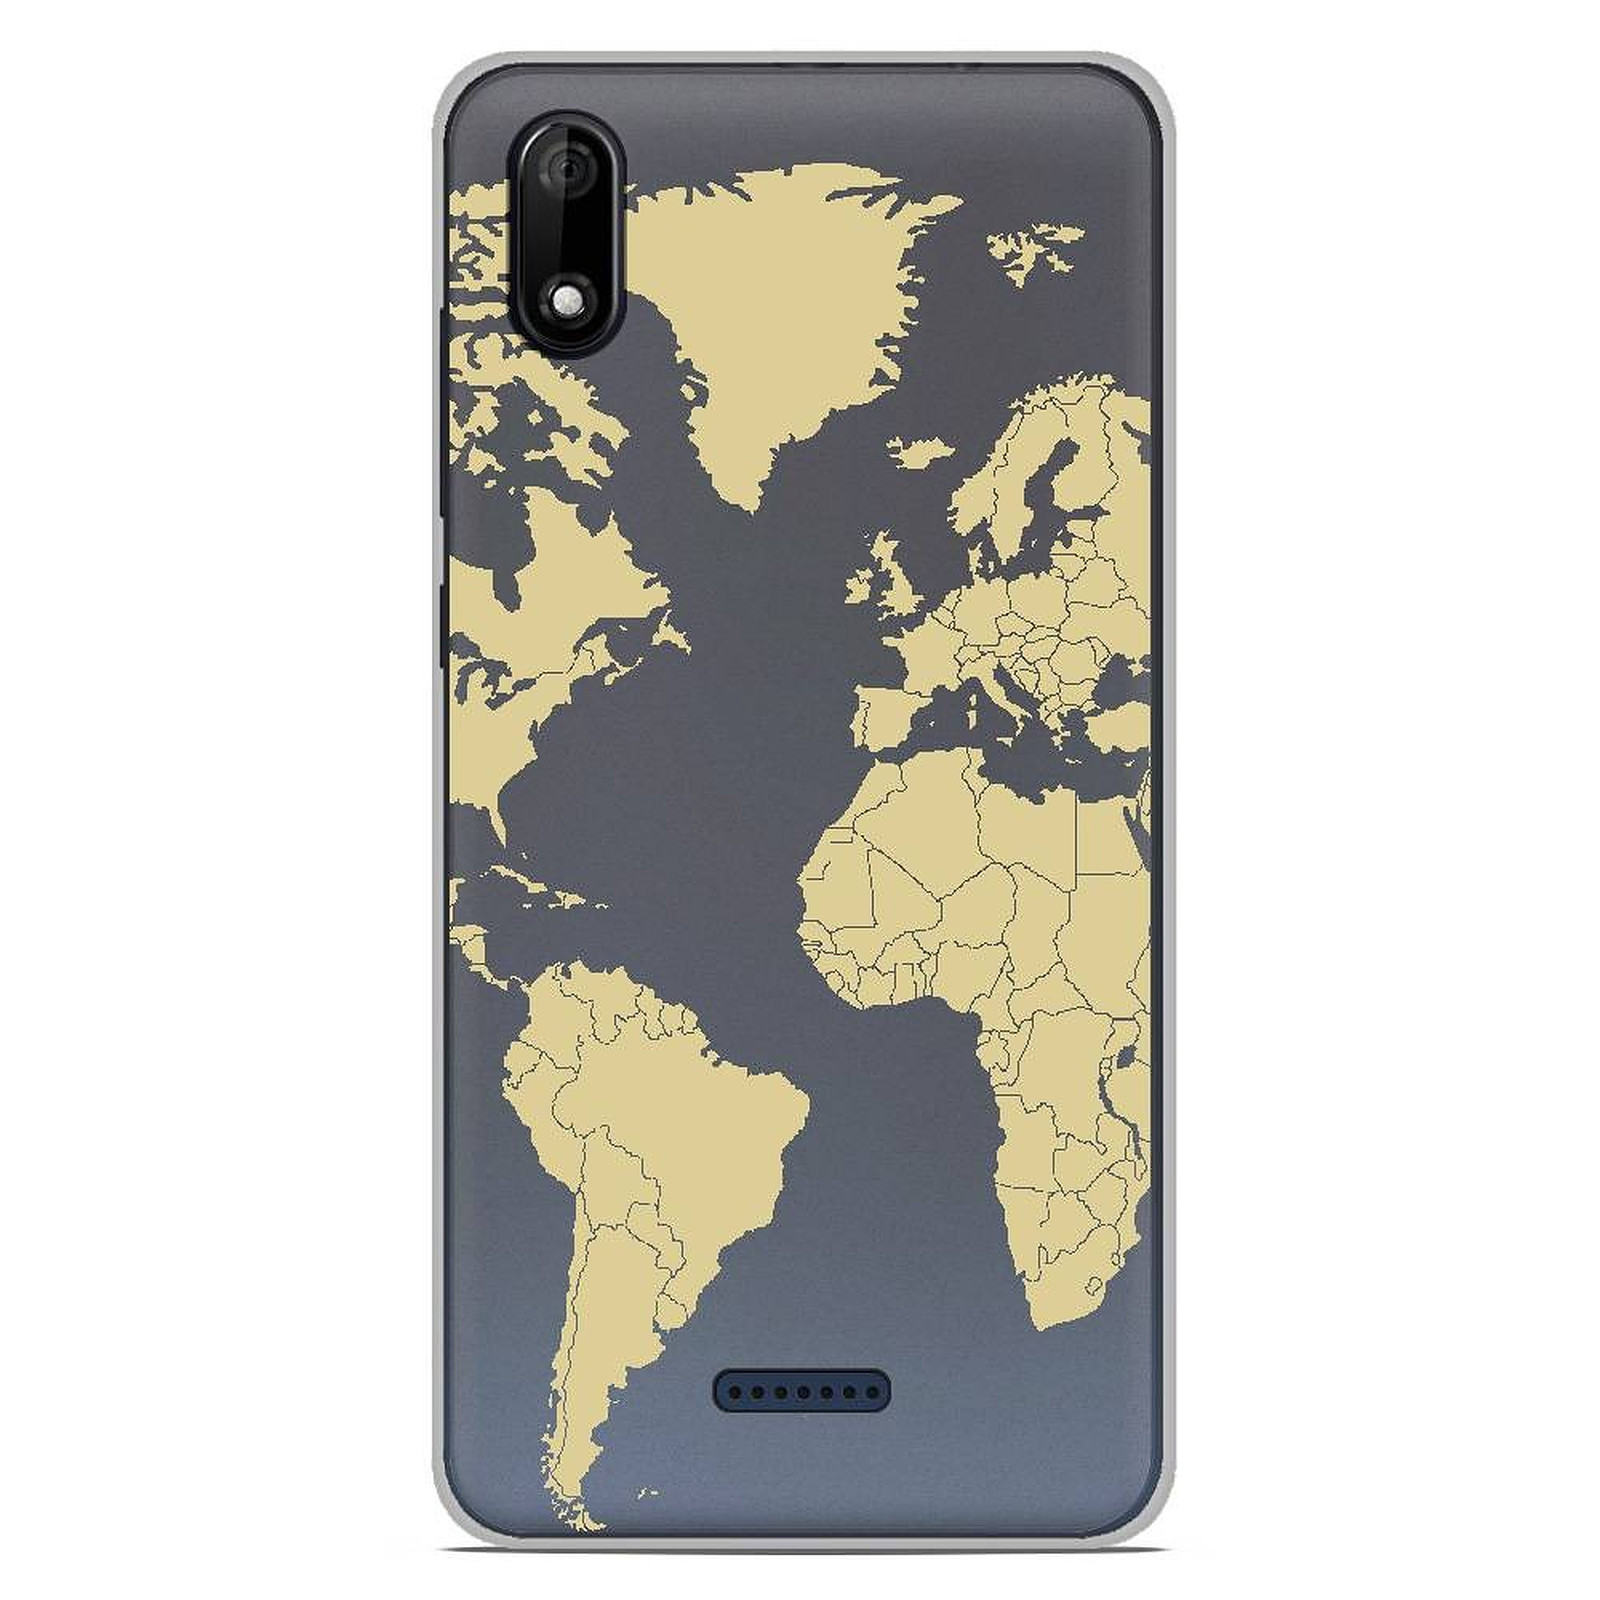 1001 Coques Coque silicone gel Wiko Y50 motif Map beige - Coque telephone 1001Coques